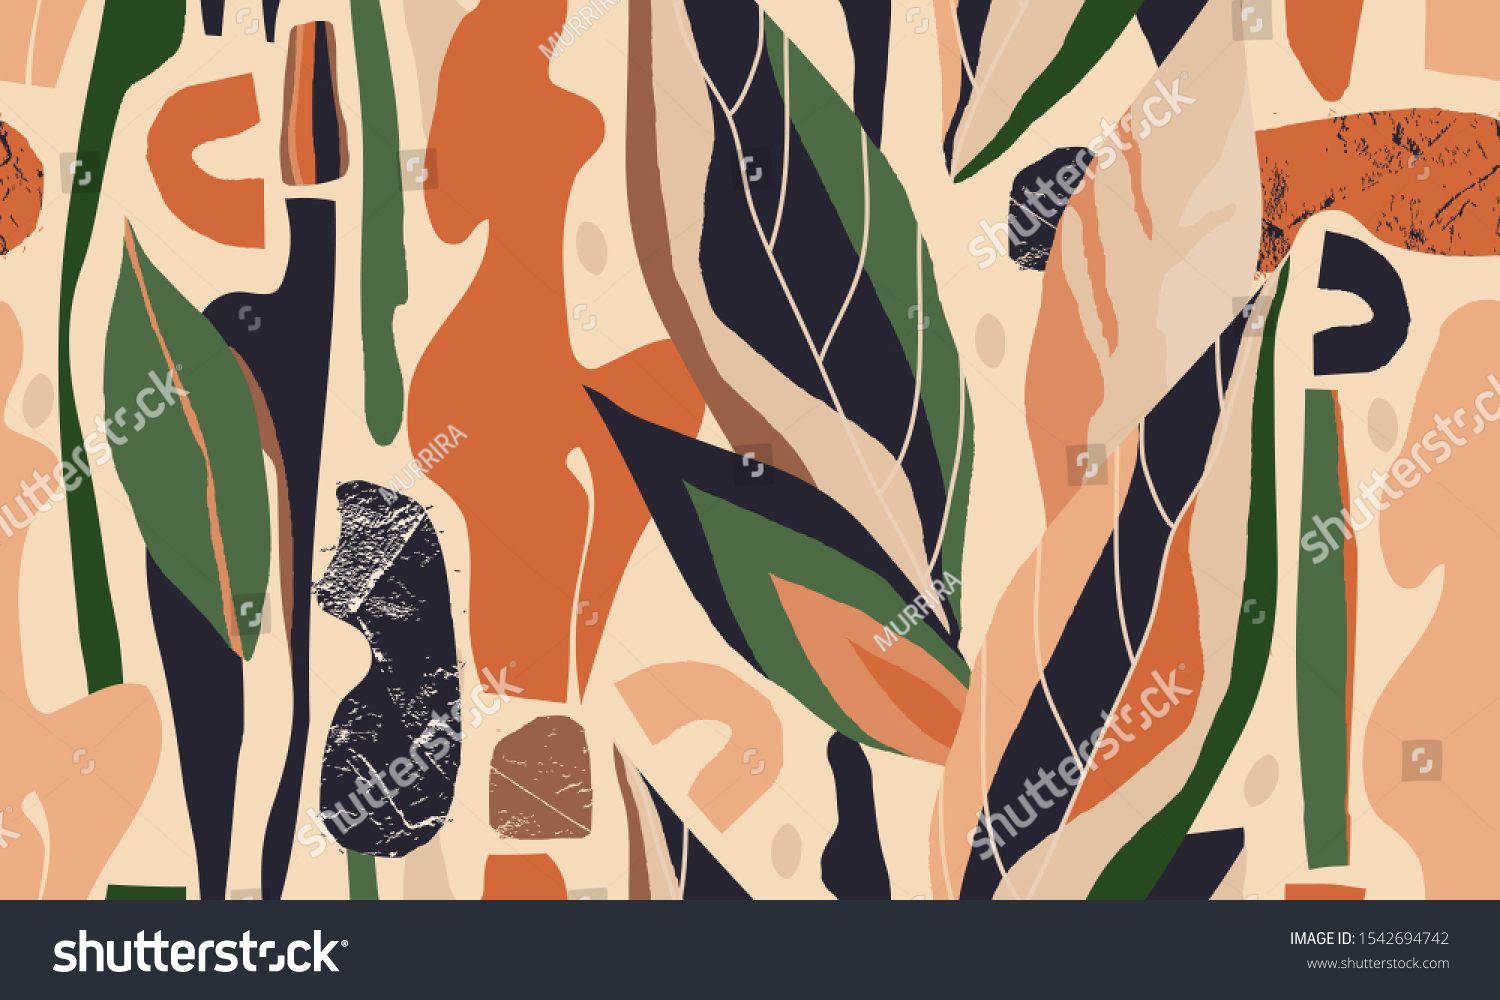 Hand drawn abstract pattern. Creative collage contemporary seamless pattern. Natural colors. Fashionable template for design. #1542694742